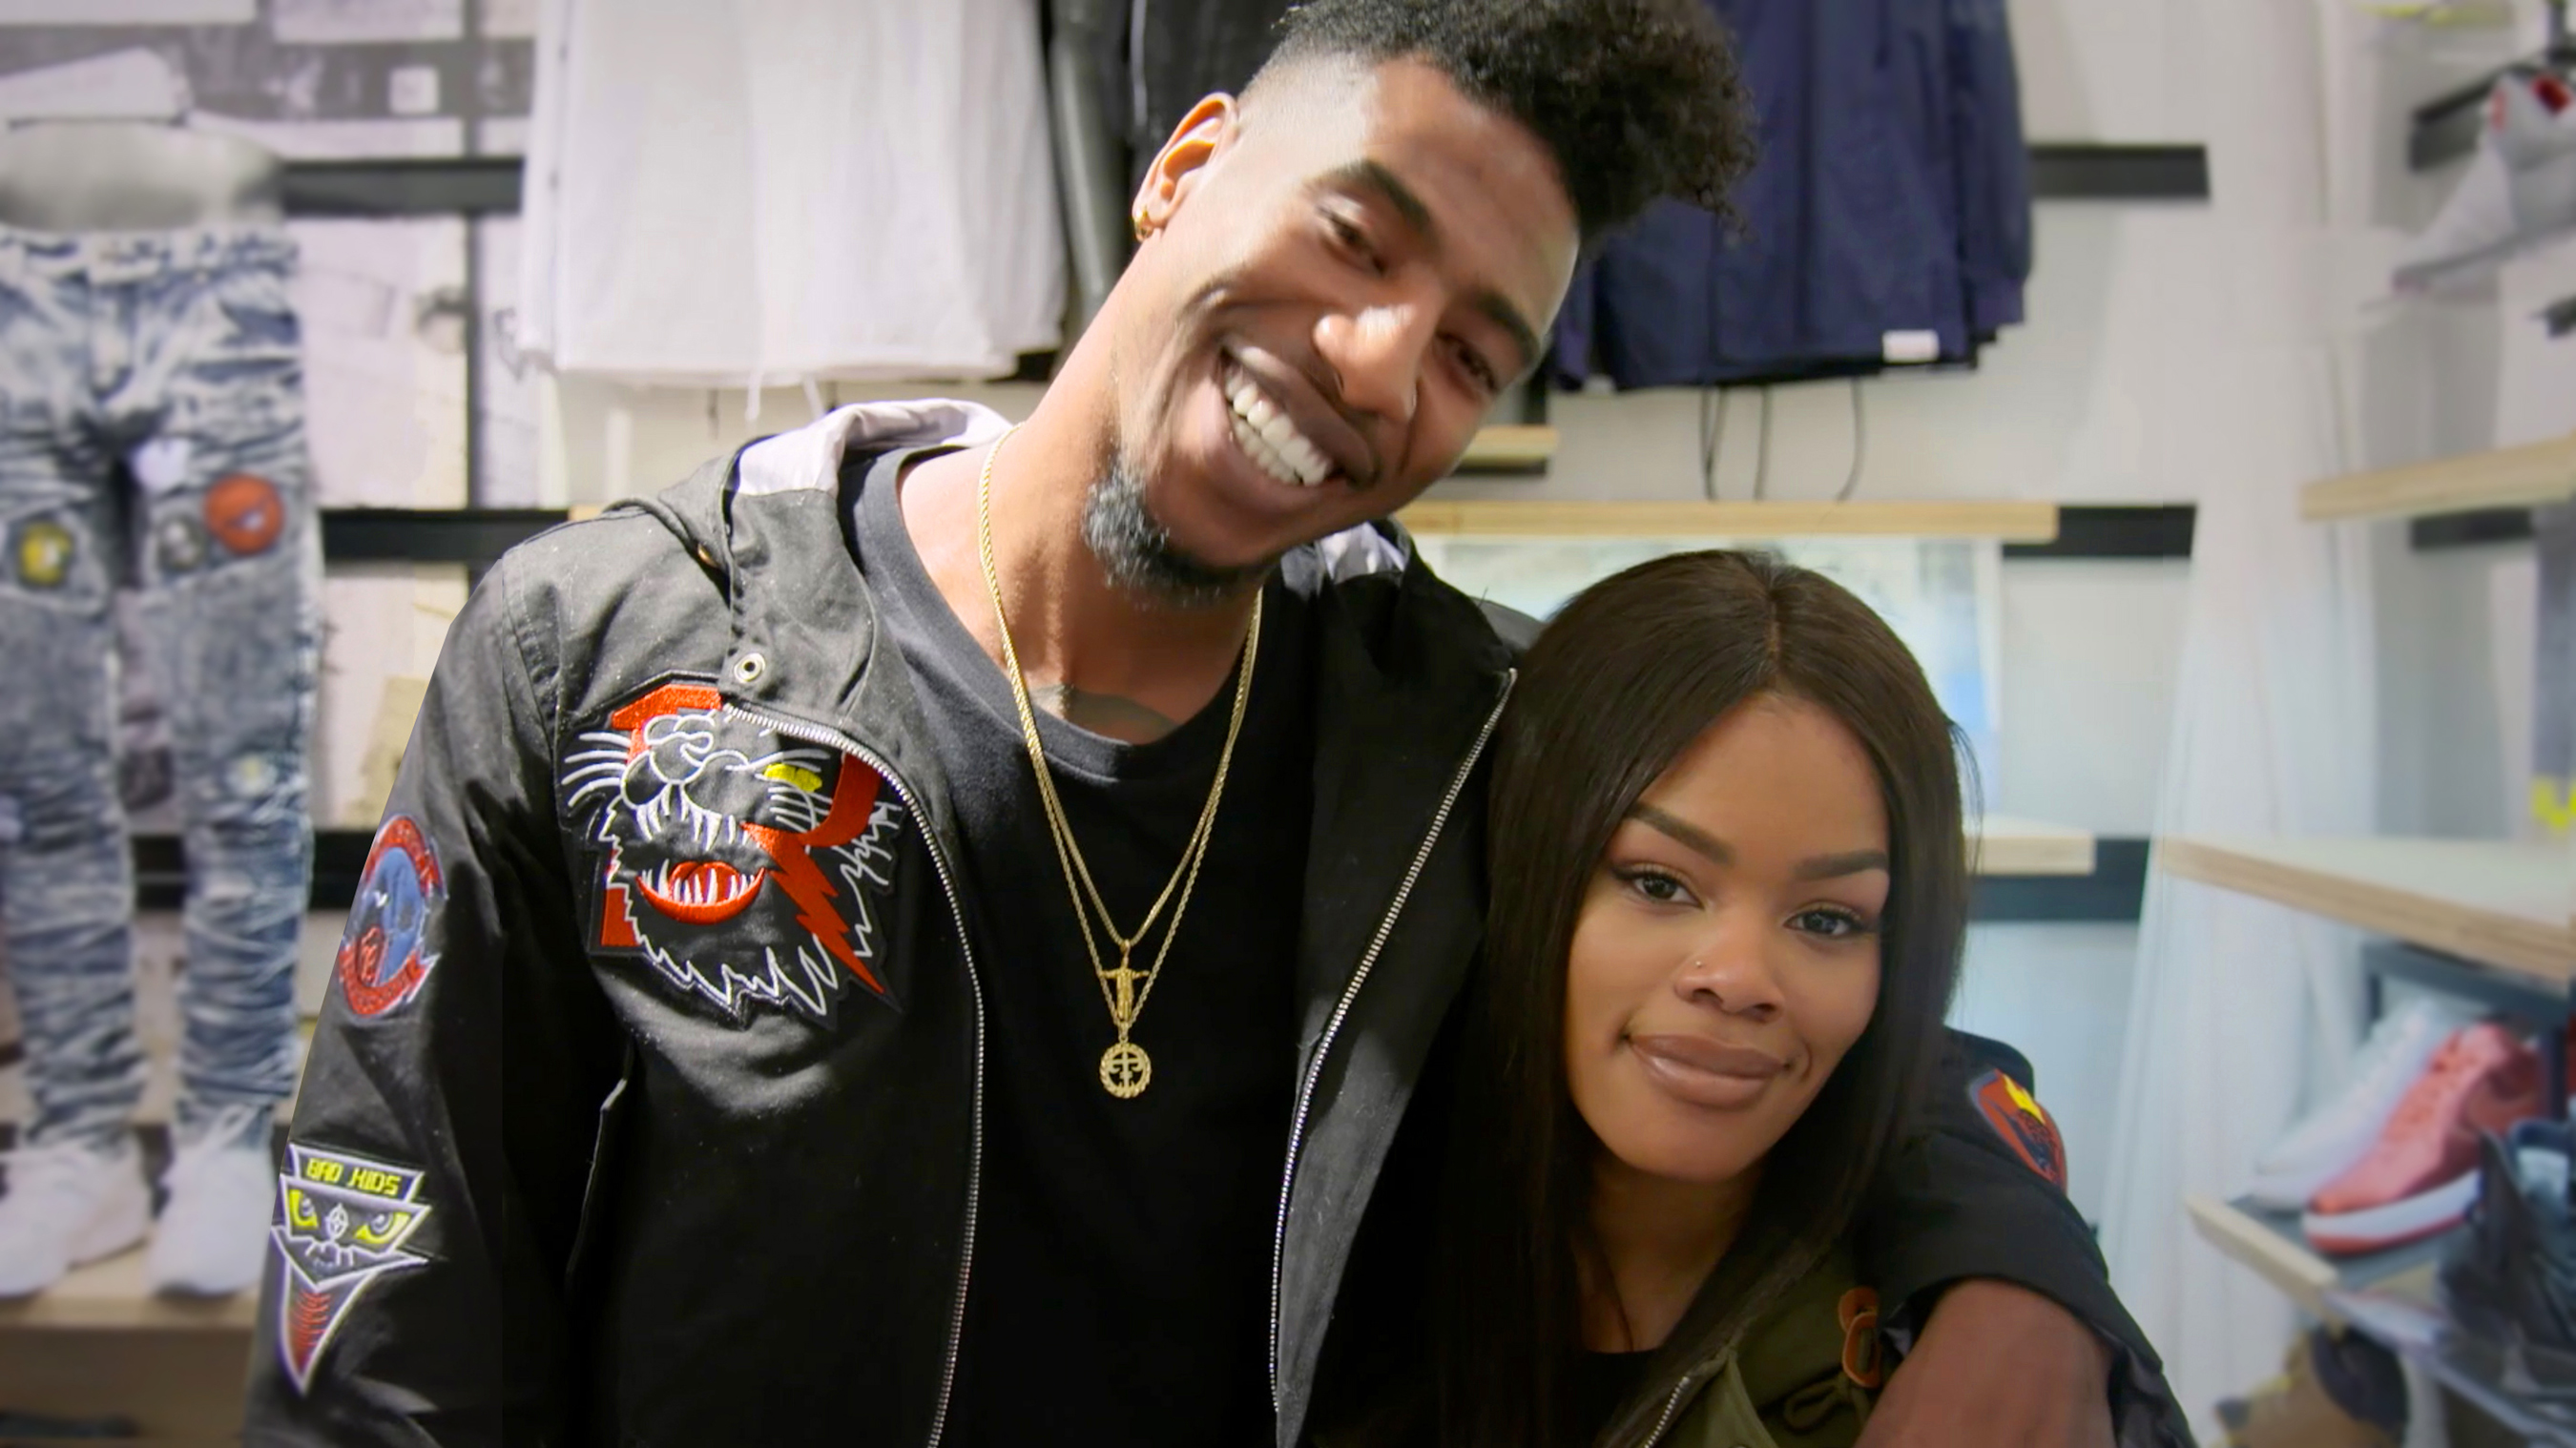 Iman Shumpert and Teyana Taylor in Footaction’s Free Flow video